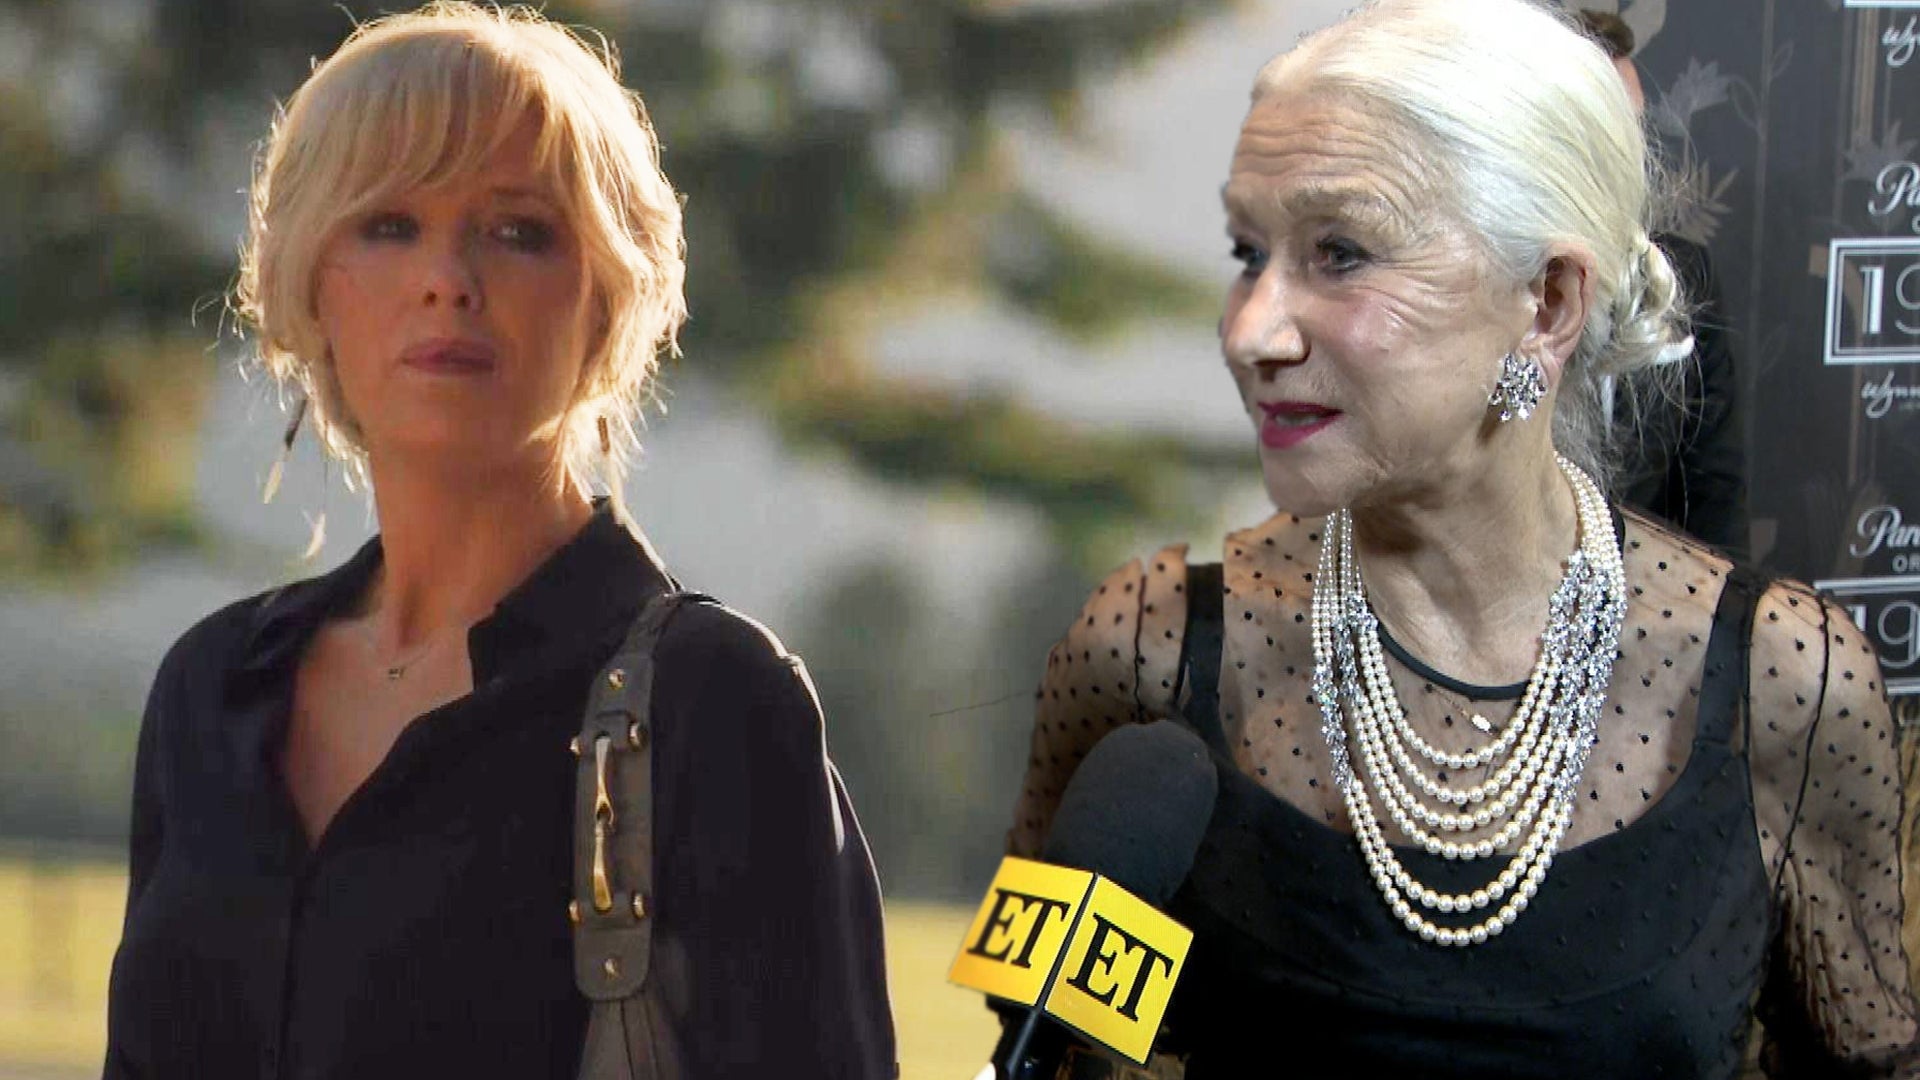 Helen Mirren Recalls Seeing Kelly Reilly 30 Years Ago and Knew She Would Be a Star (Exclusive)